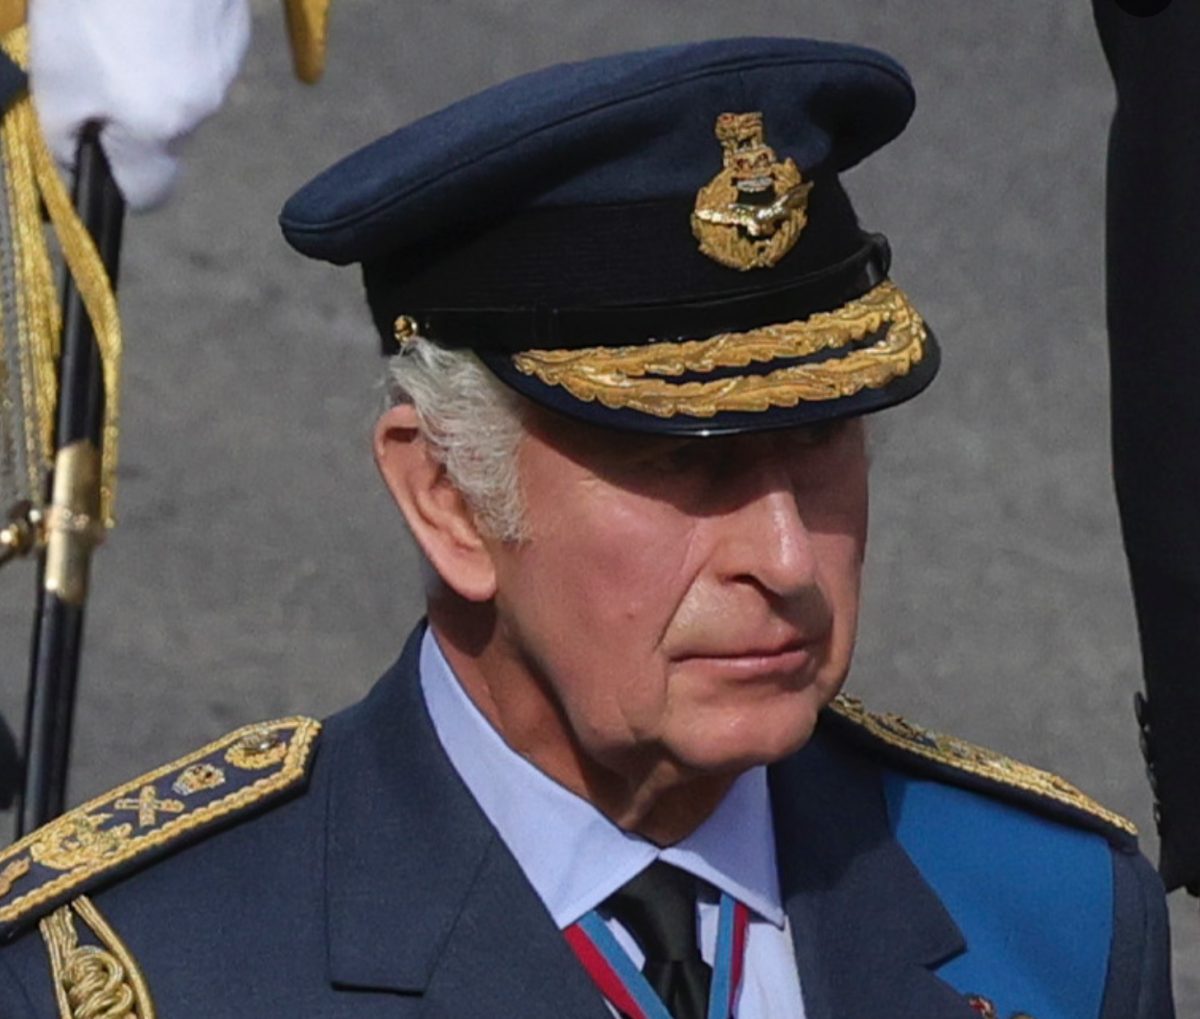 King+Charles+wearing+his+military+uniform.+British+royalty+is+encouraged+to+serve+in+the+armed+forces+%28Photo+by+S.+Dawson%29.+